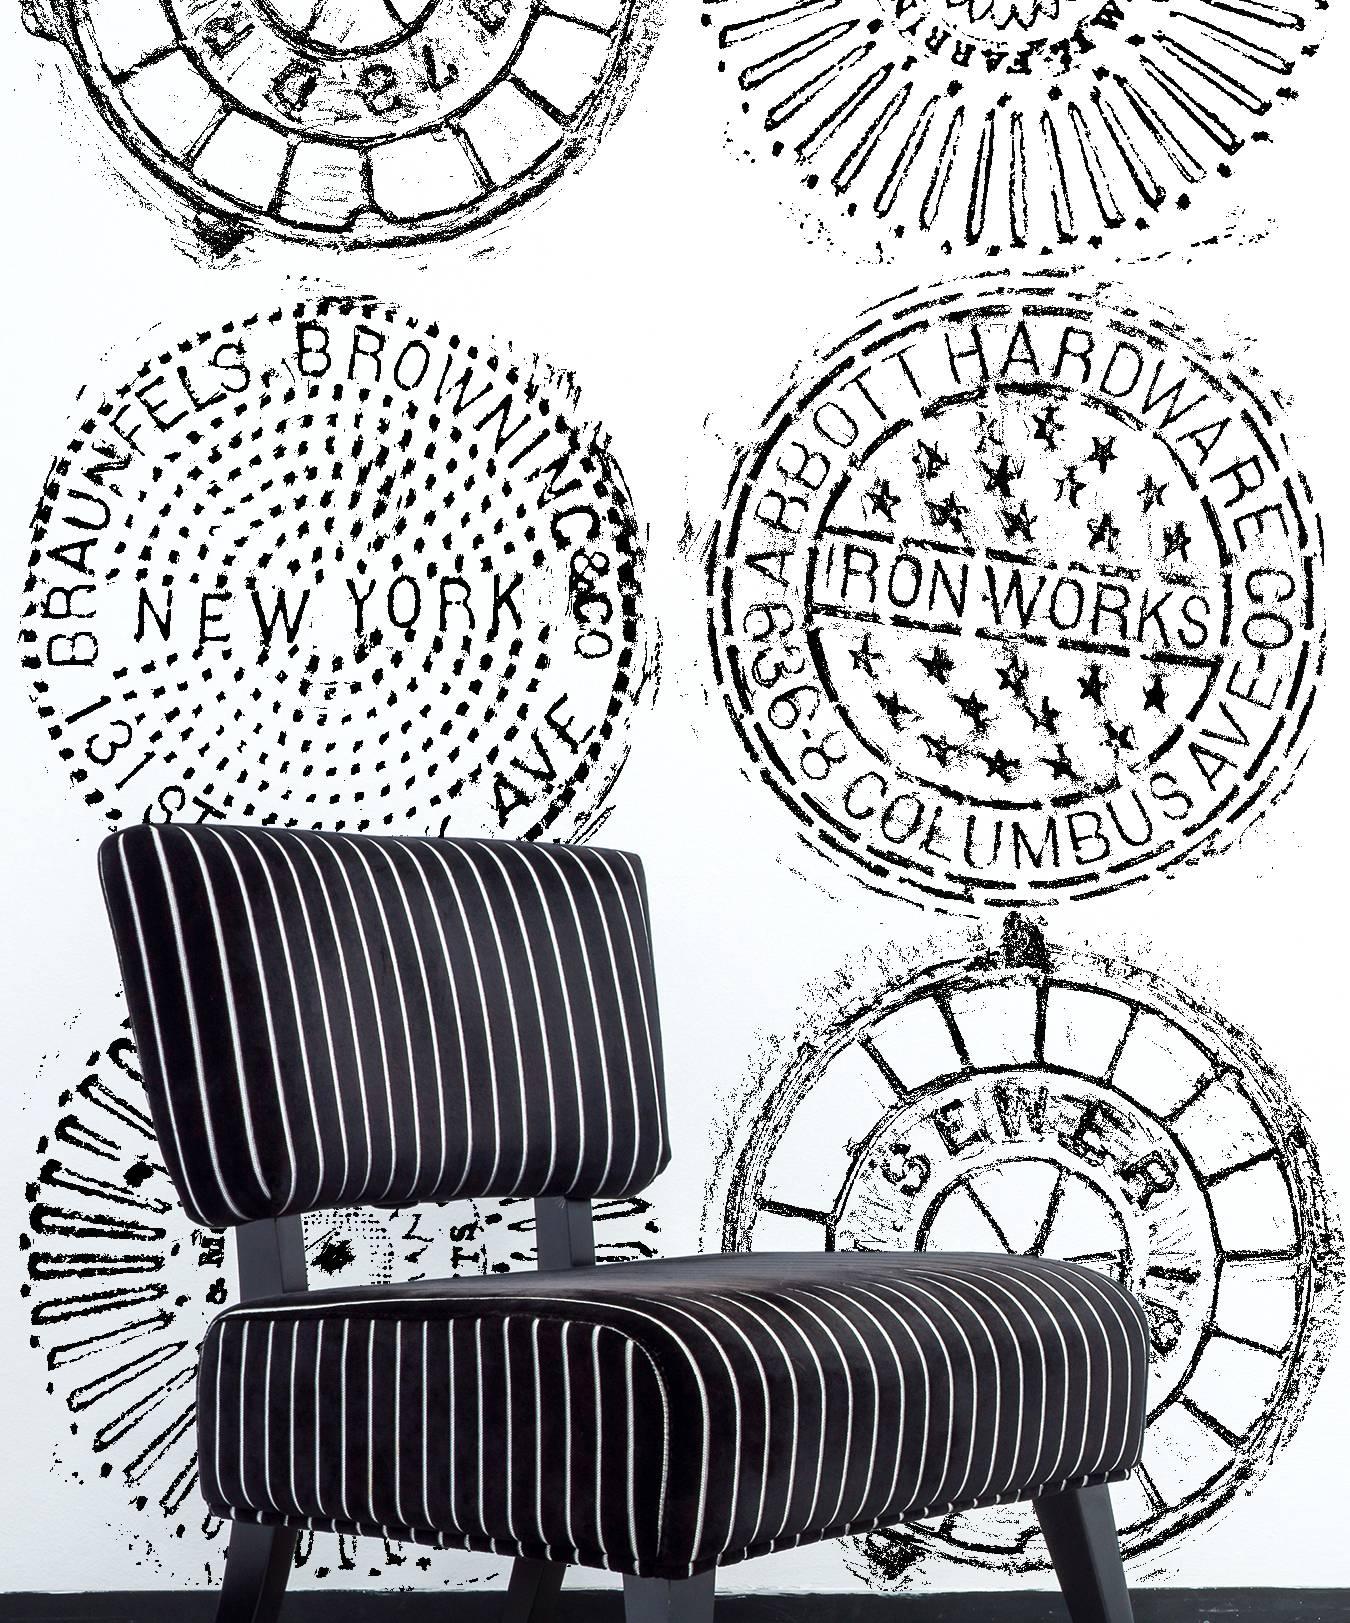 Contemporary NYC Manhole Printed Wallpaper, White on Black Manhole Cover For Sale